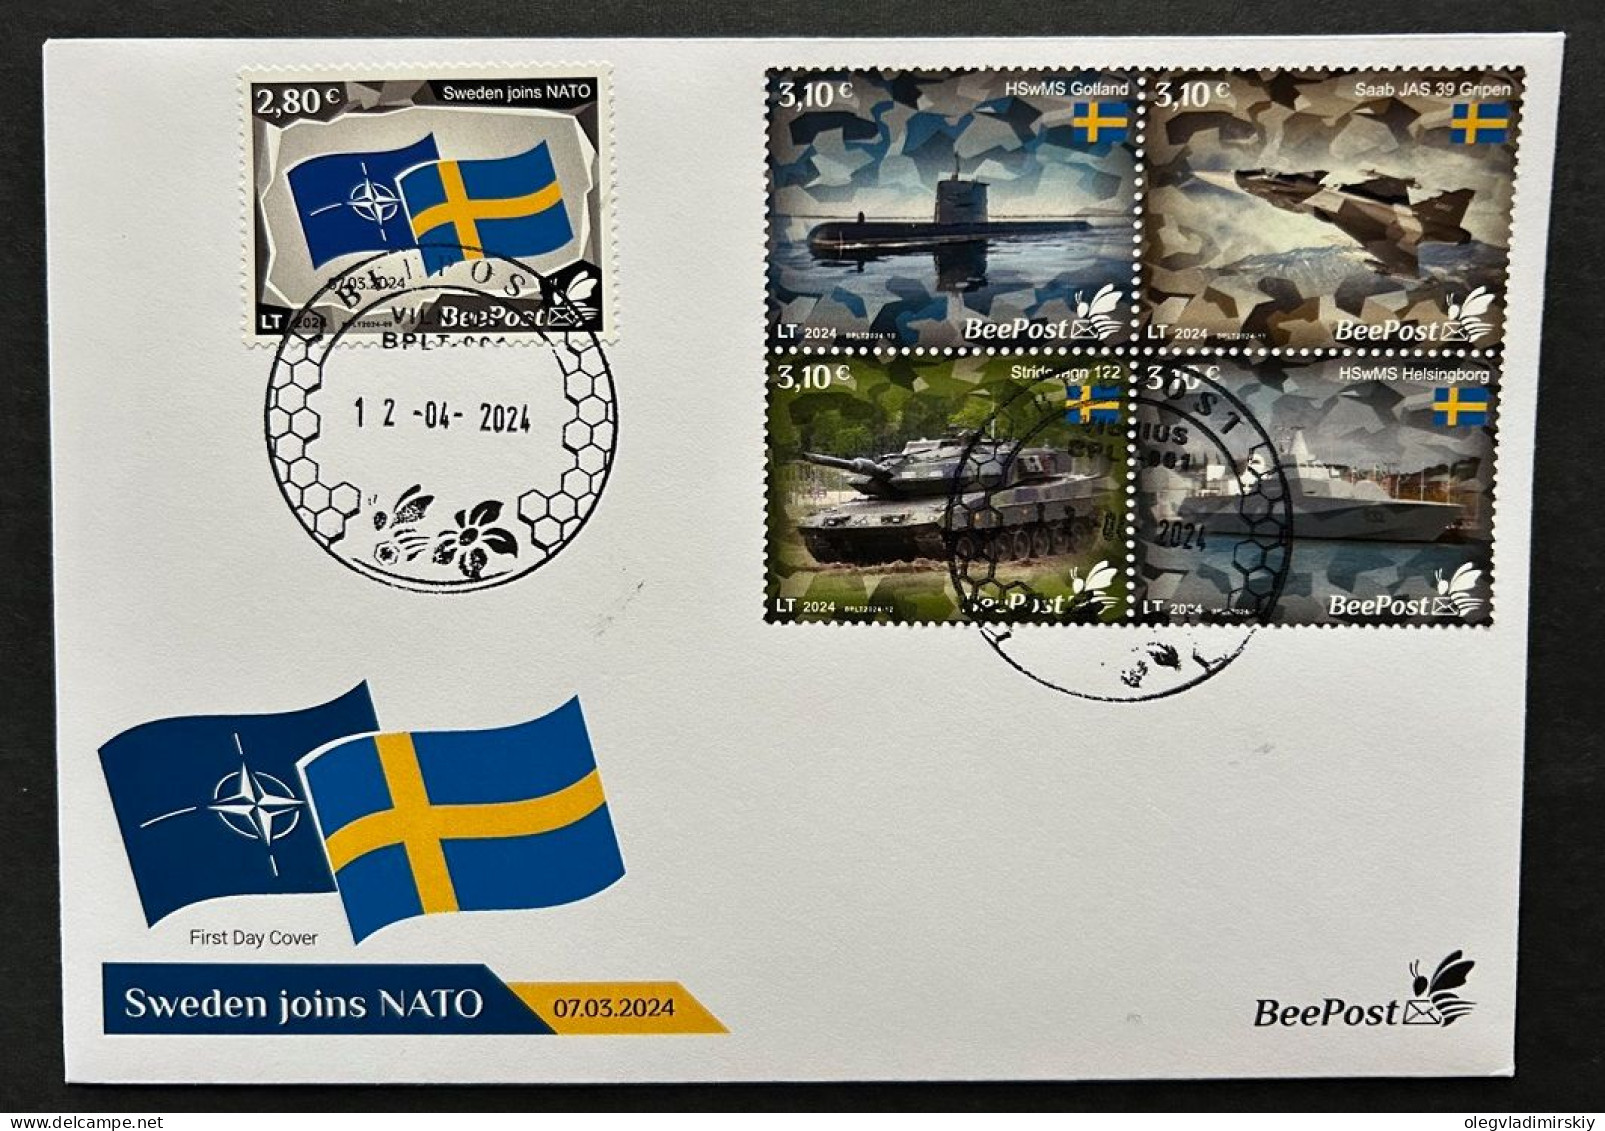 Lithuania 2024 Baltic - NATO Sea Sweden Joins NATO Tank Submarine Warship Airplane Flags BeePost Set Of 5 Stamps FDC - Duikboten